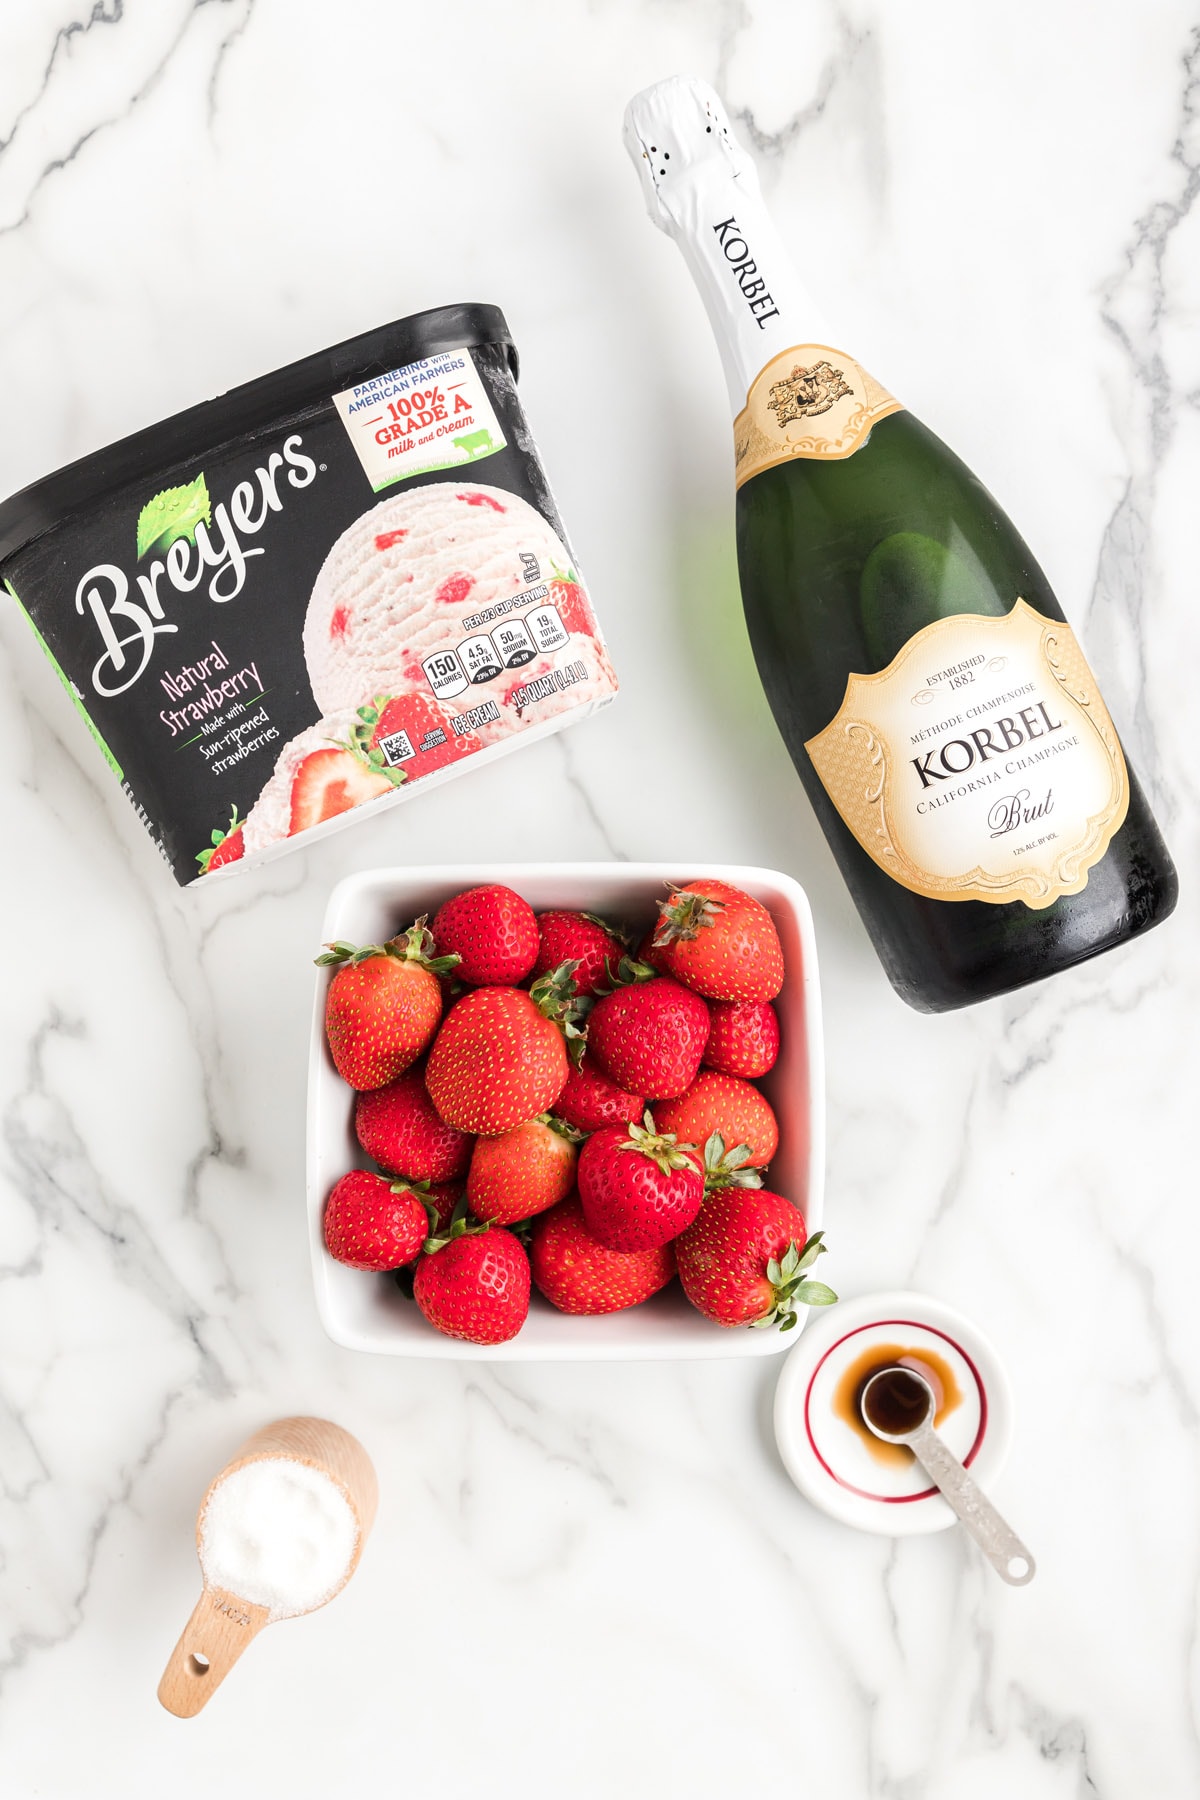 Strawberry Champagne Floats ingredients